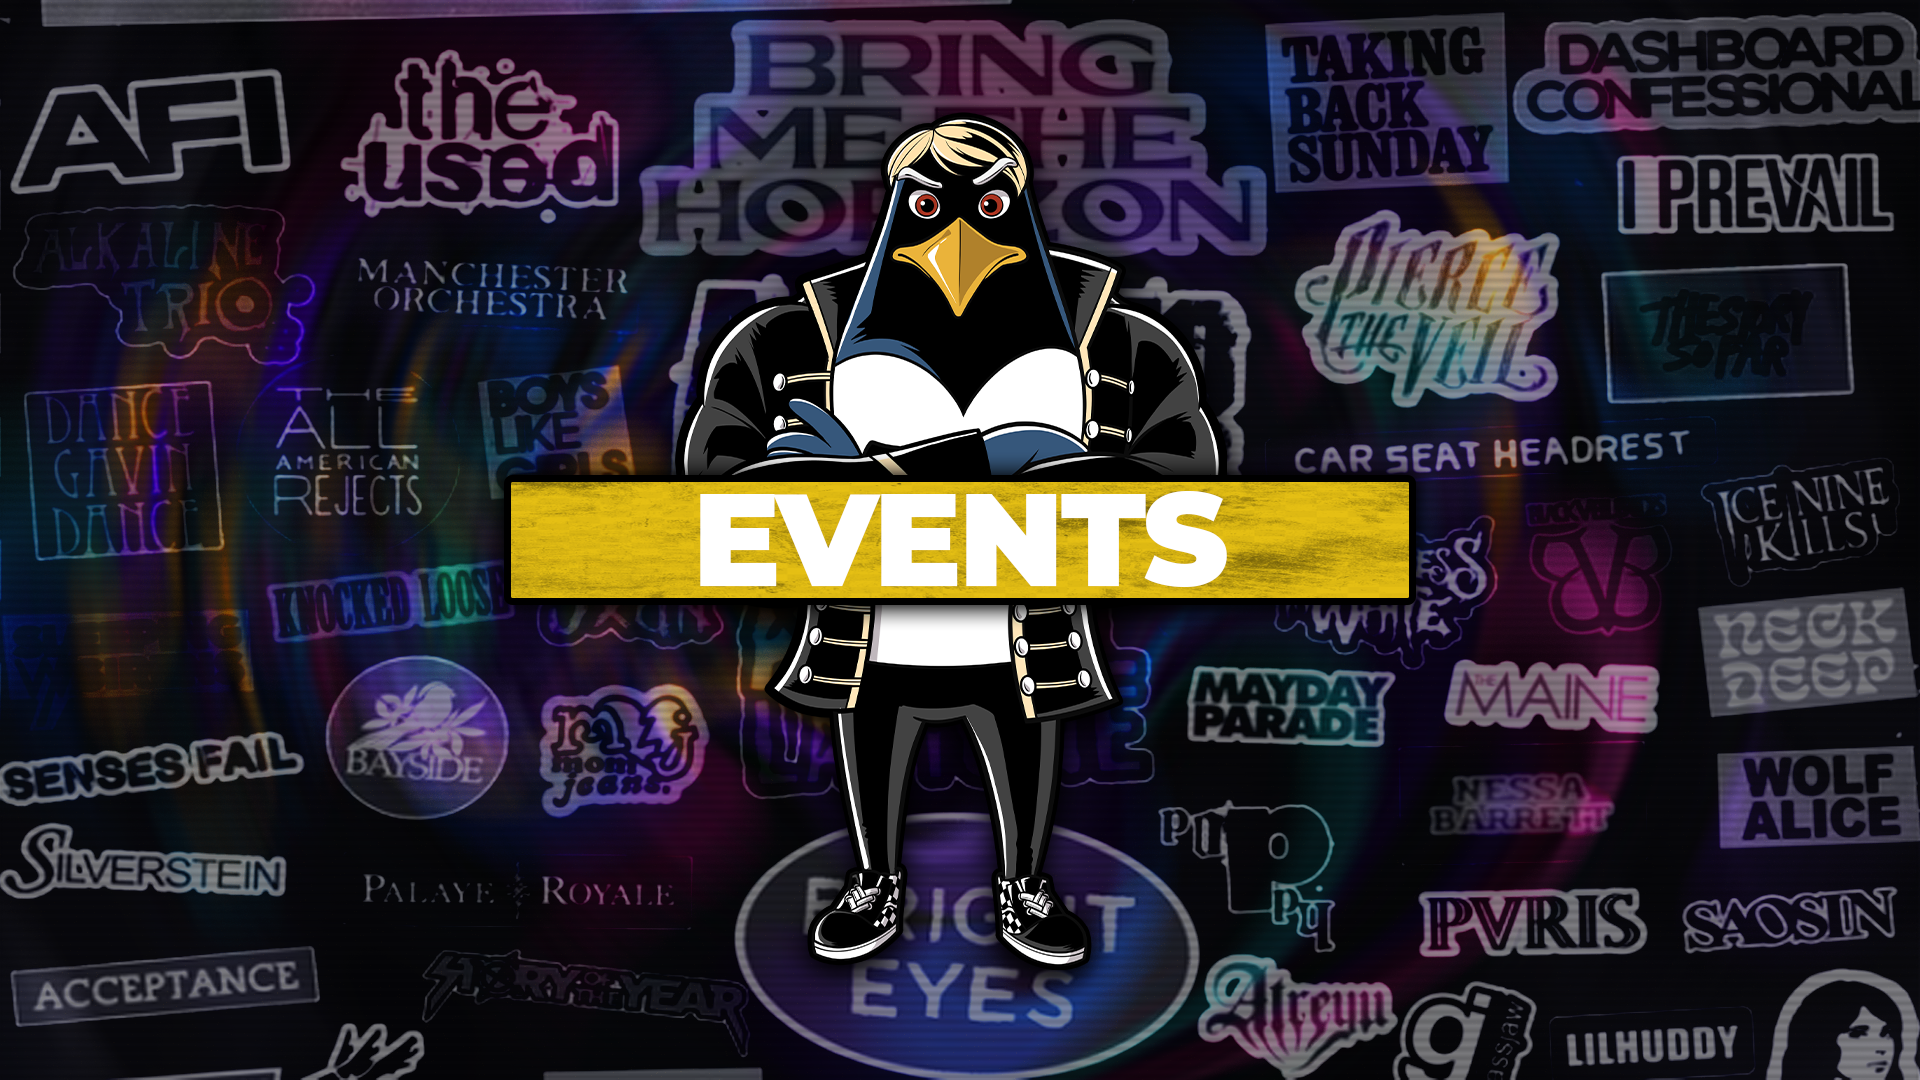 Pittsburgh Emo Concerts: A dynamic Emo Night Events banner showcasing a cartoon penguin with a rock star vibe, posed confidently against a vibrant neon background of various band logos, including AFI, The Used, and Bring Me The Horizon. The word 'EVENTS' is highlighted in bold yellow, signaling upcoming emo and punk rock concerts and gatherings for fans to enjoy.